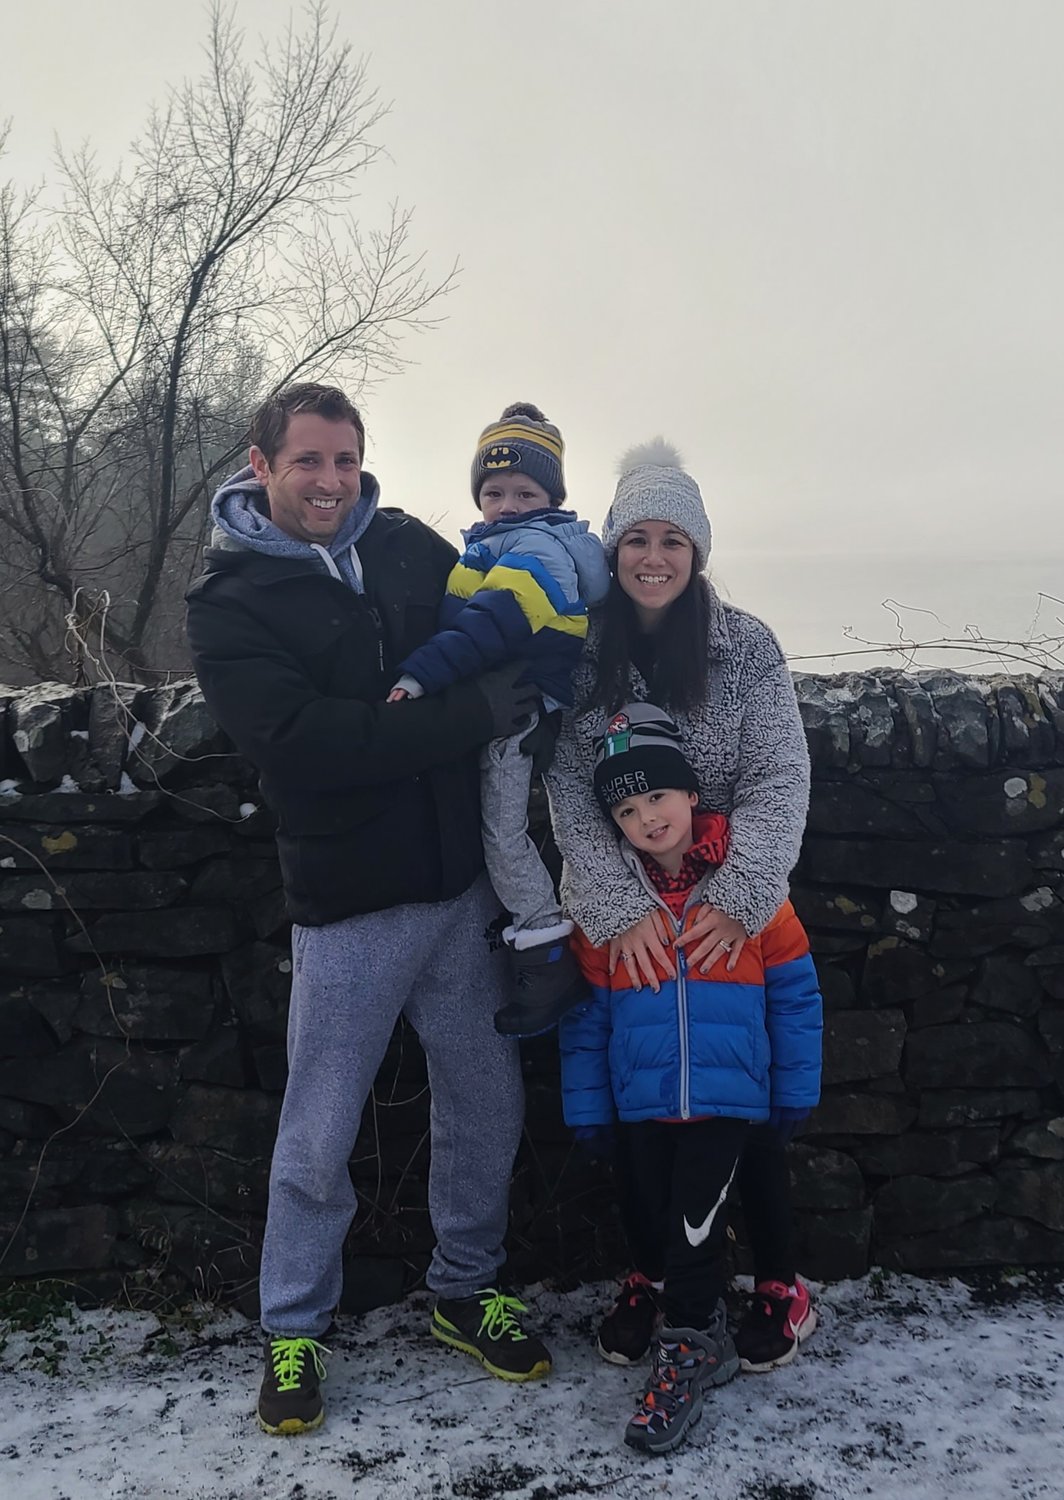 The Tucker family hopes that “Super Scar” will promote awareness of scars left by open-heart surgery, which is often the treatment for congenital heart defects.